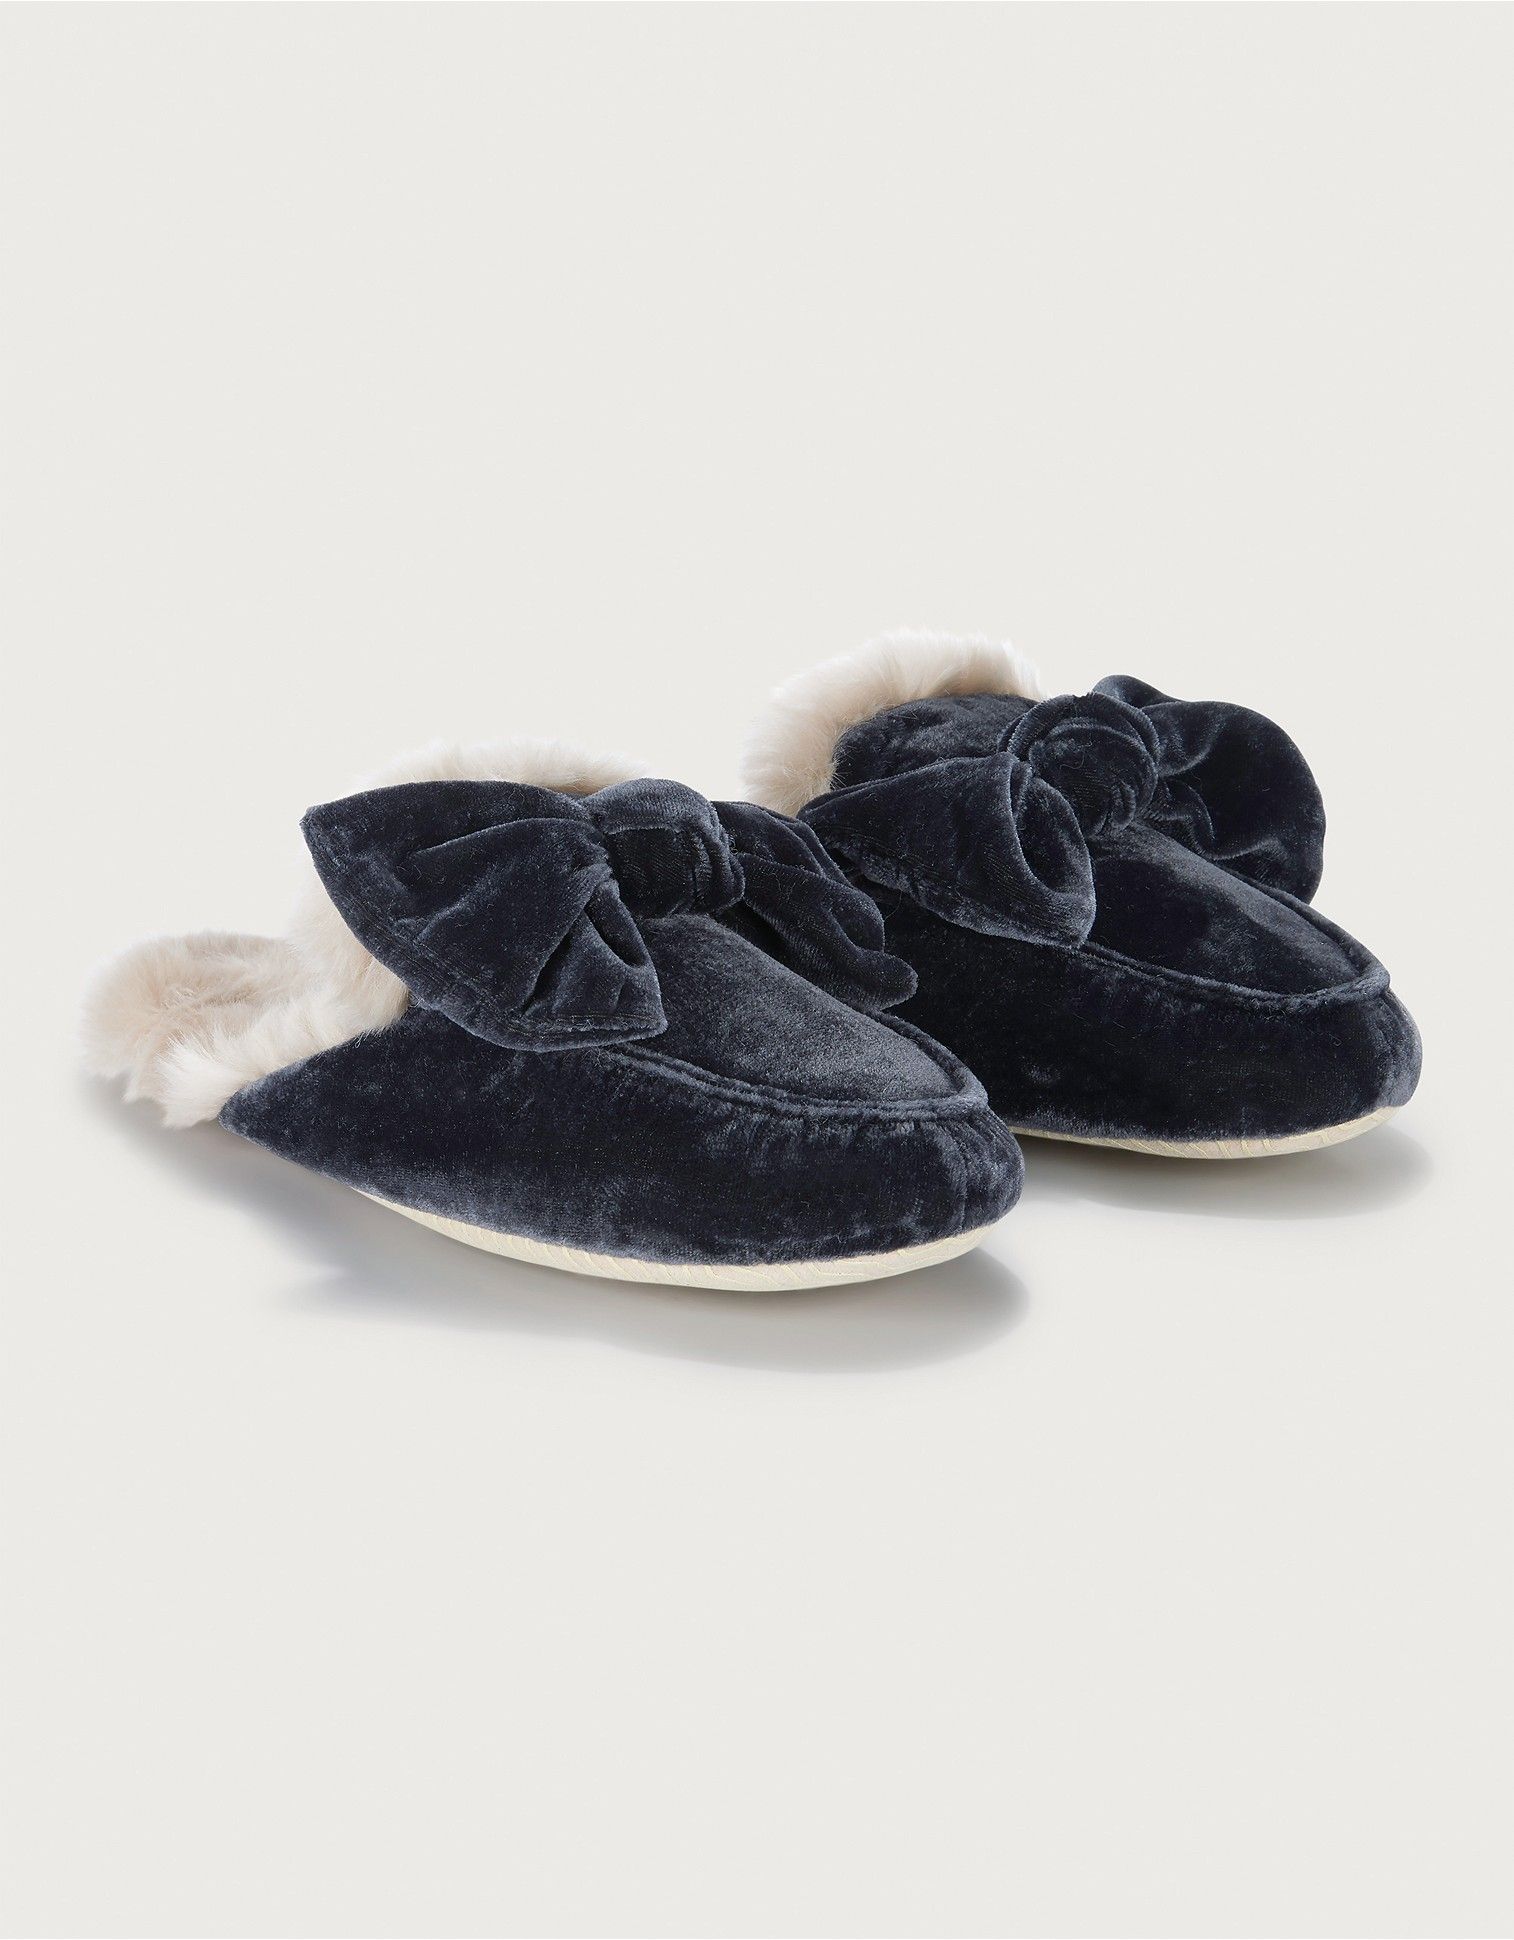 21 best womens slippers to shop 2020